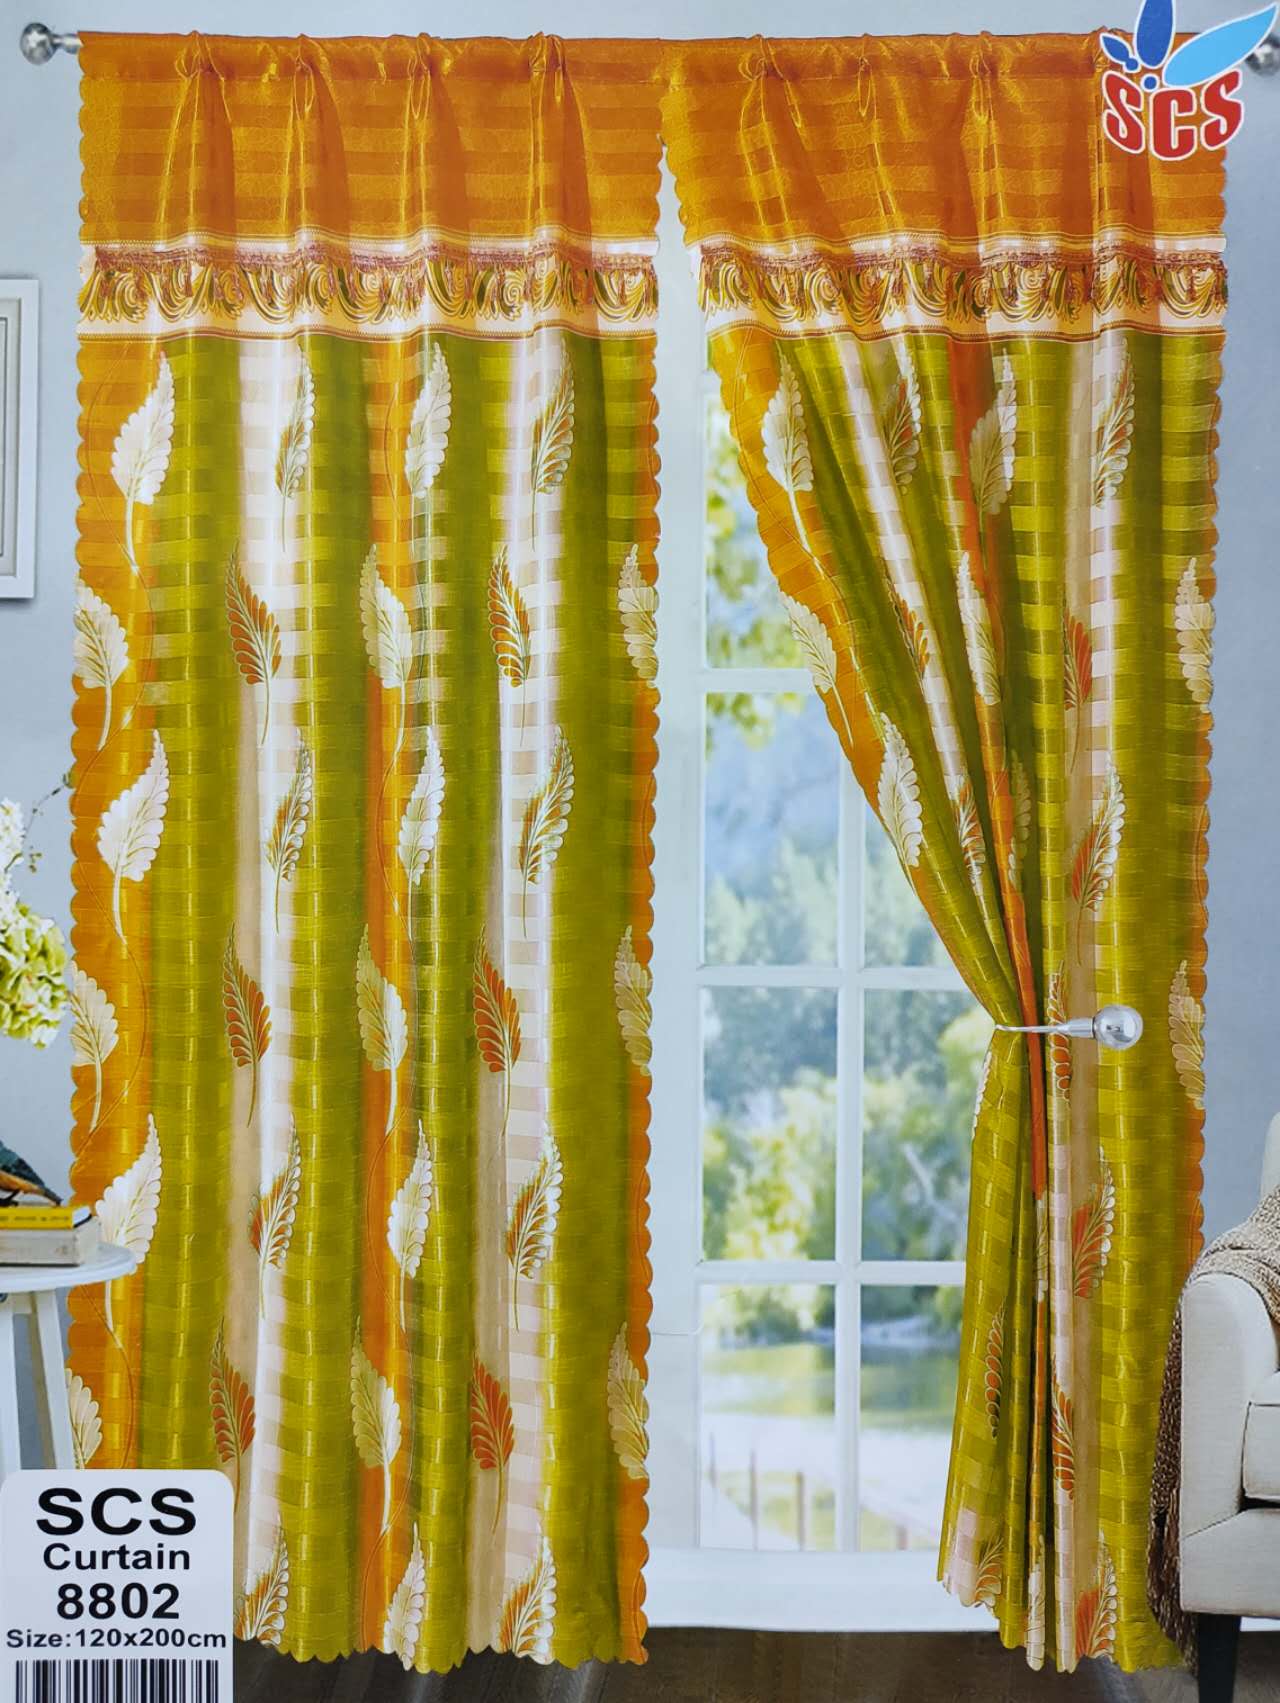 Curtain Style Guide: 15 Types of Curtains For Your Home